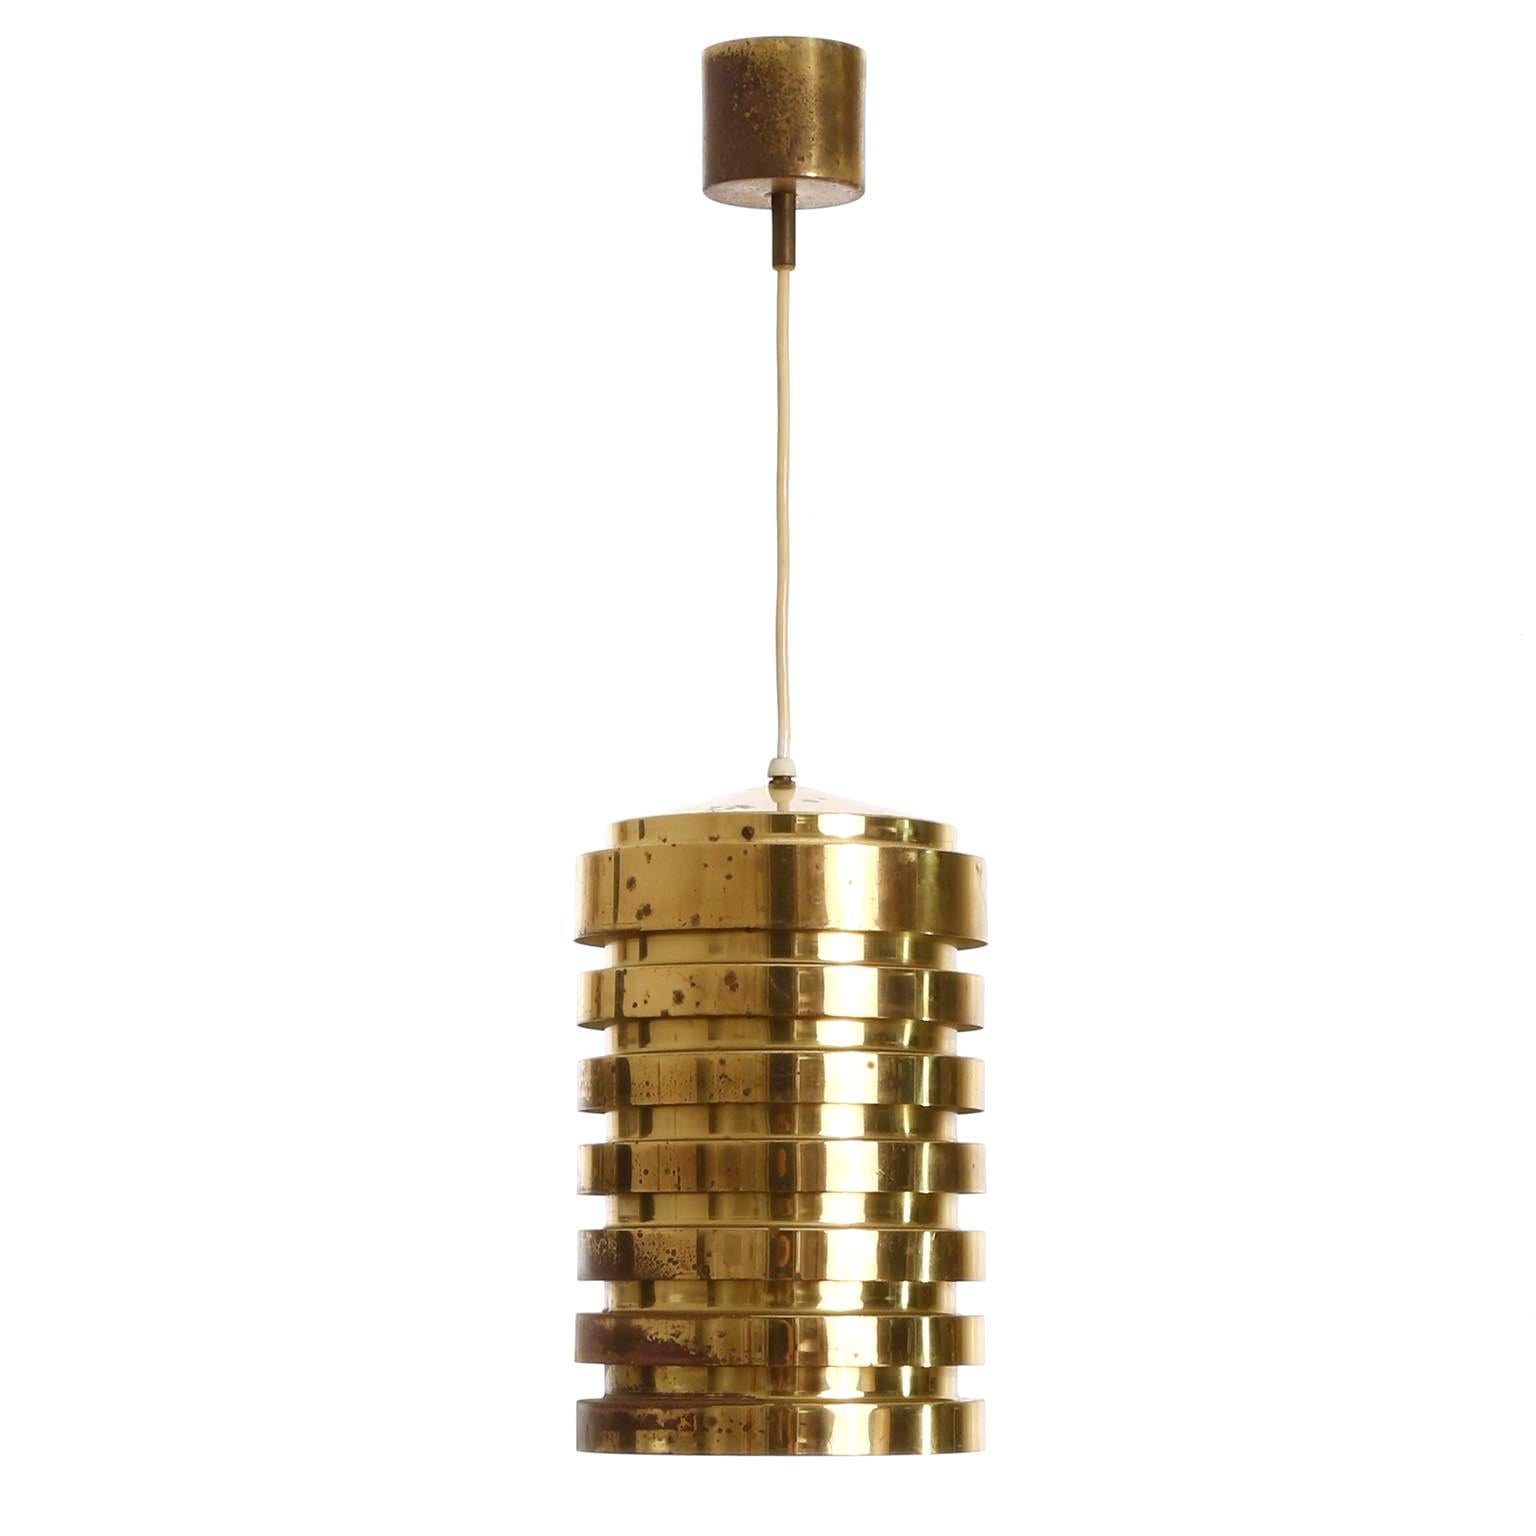 A Mid-Century Modern cylindrical and polished solid brass pendant light with great patina designed by Hans-Agne Jakobsson and manufactured by AB Markaryd circa 1960.
The inside is painted white, aged and thus a bit yellowed.
One side has more patina